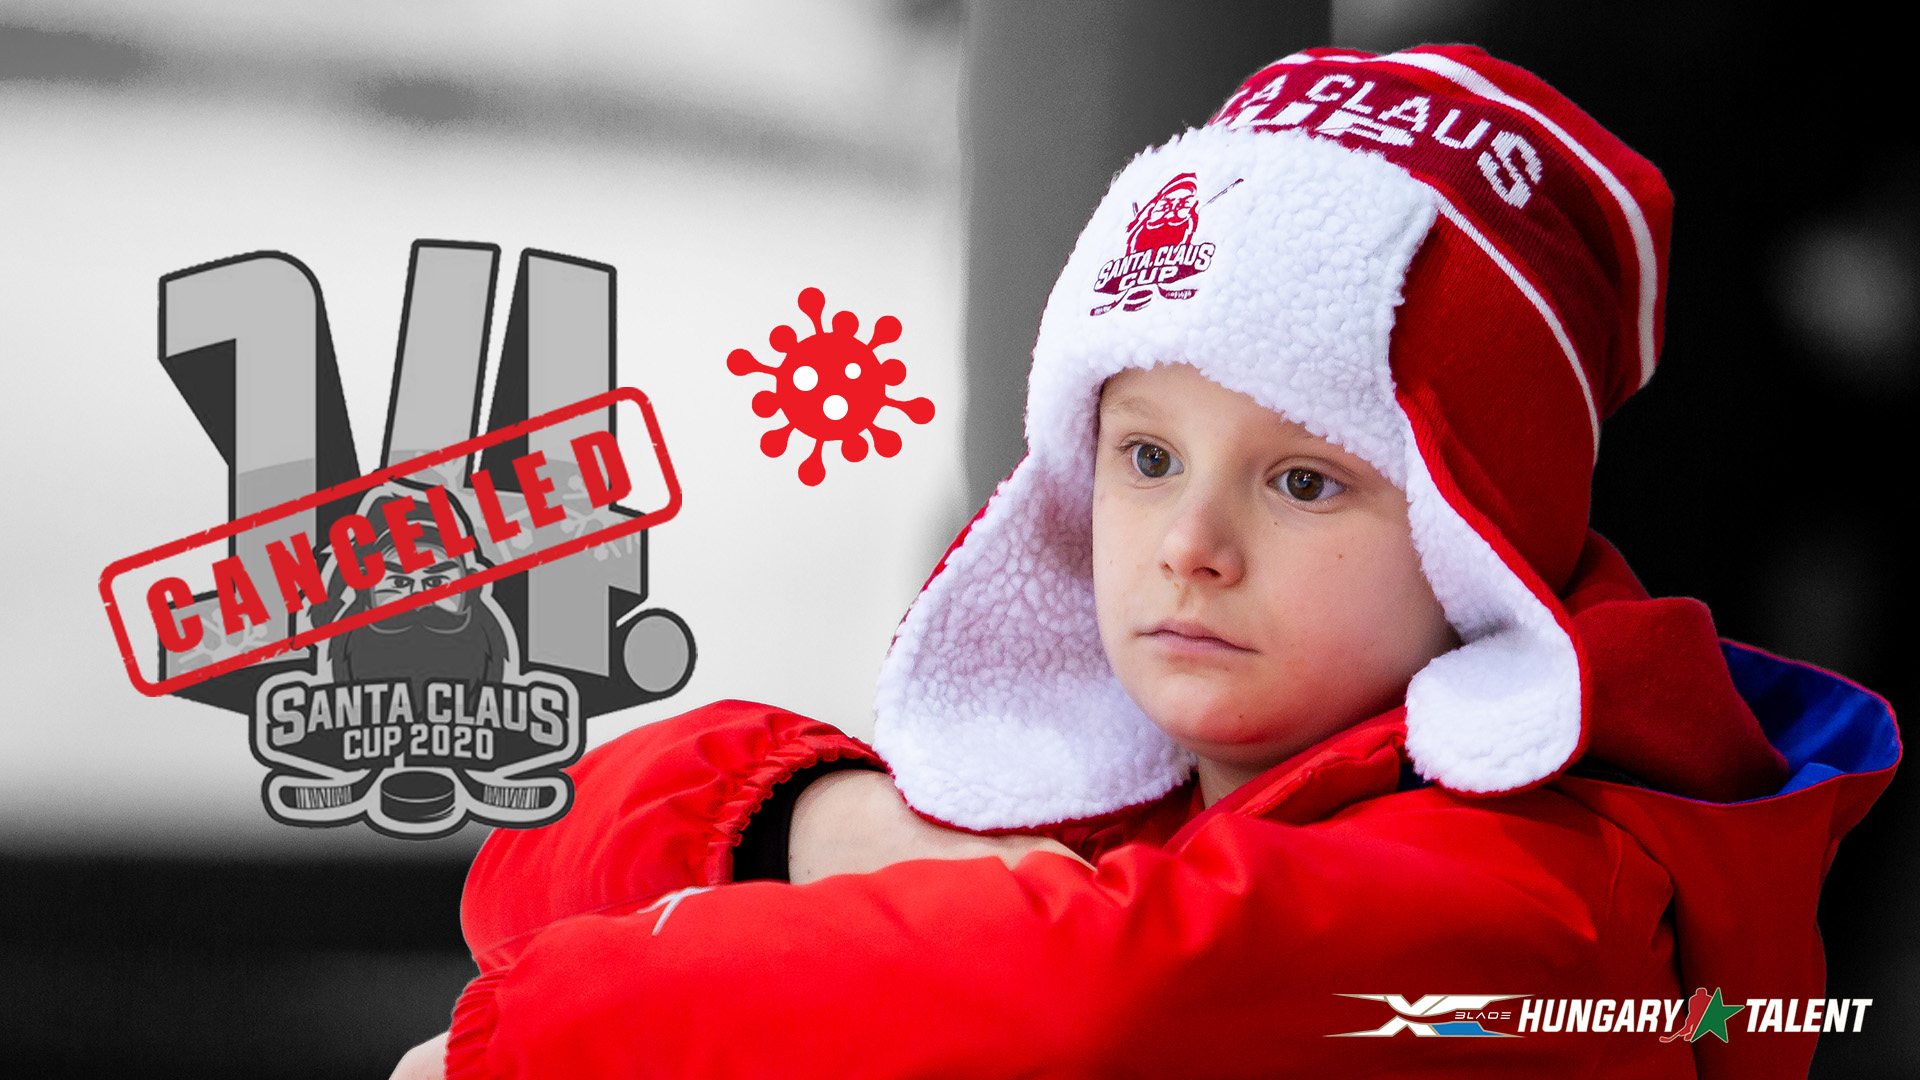 Santa Claus Cup is cancelled!